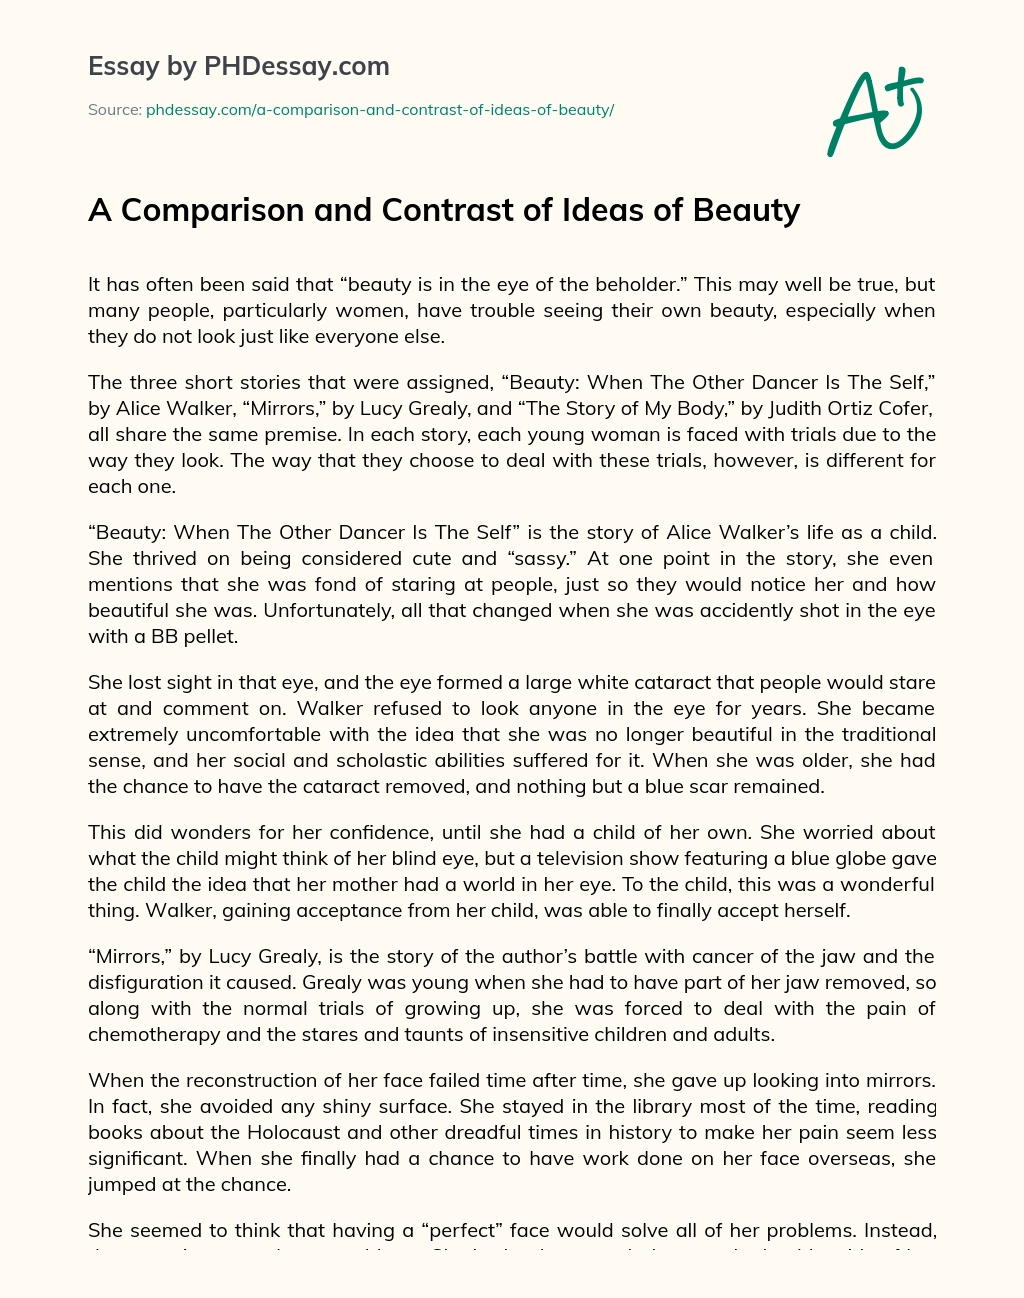 A Comparison and Contrast of Ideas of Beauty essay